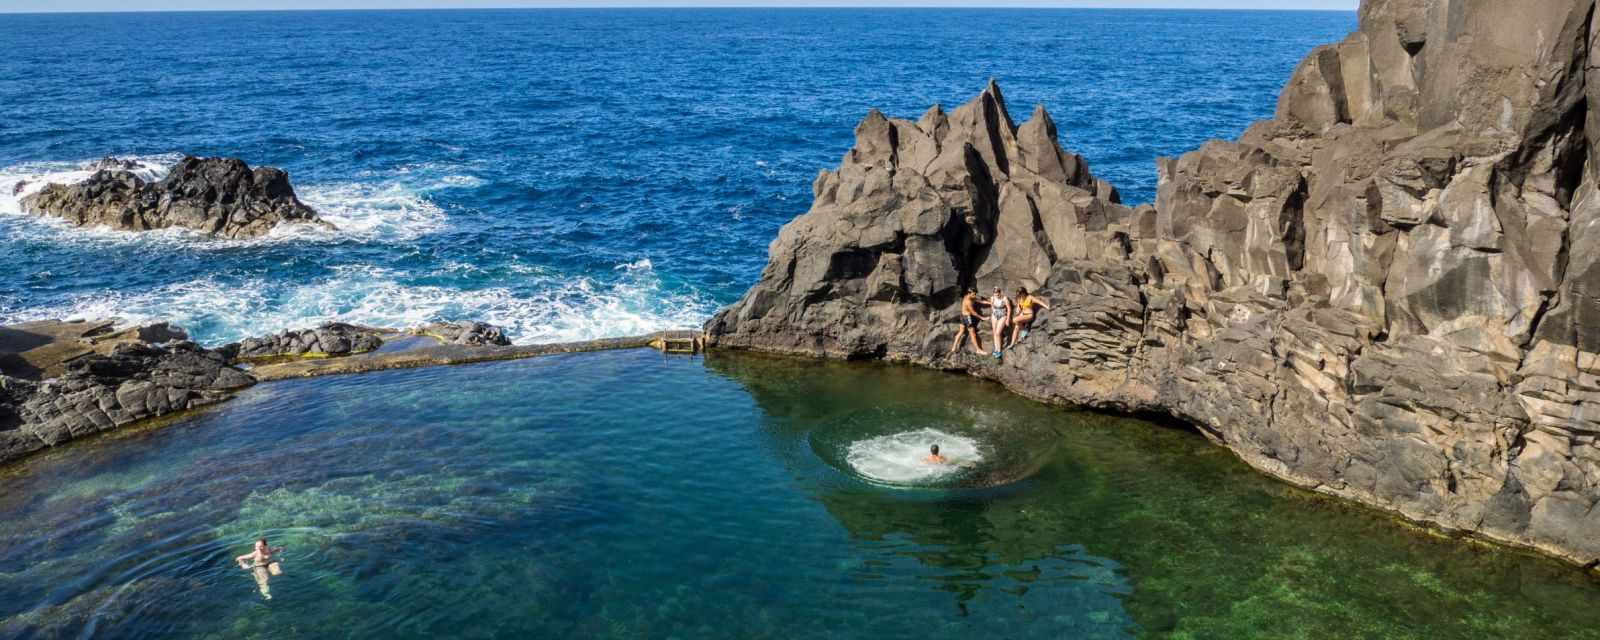 7 Best Beaches and Natural Pools in Madeira - Portugal